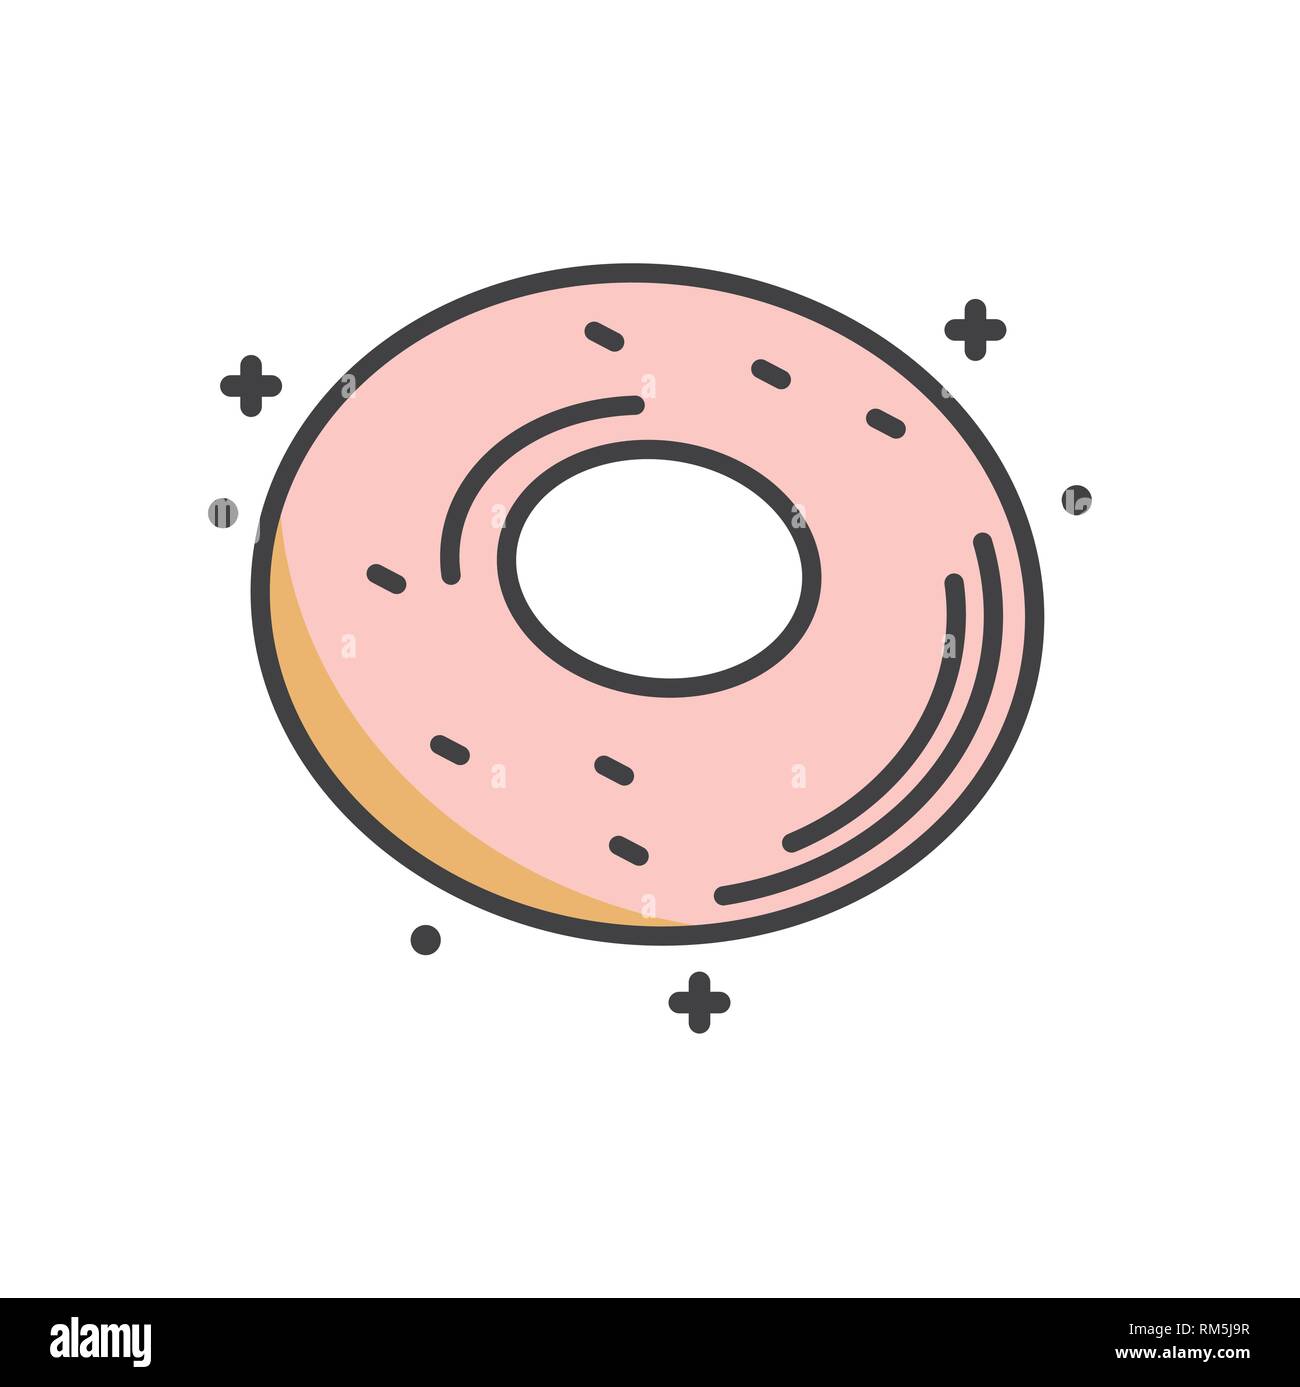 Donut outline icon on white background for graphic and web design ...